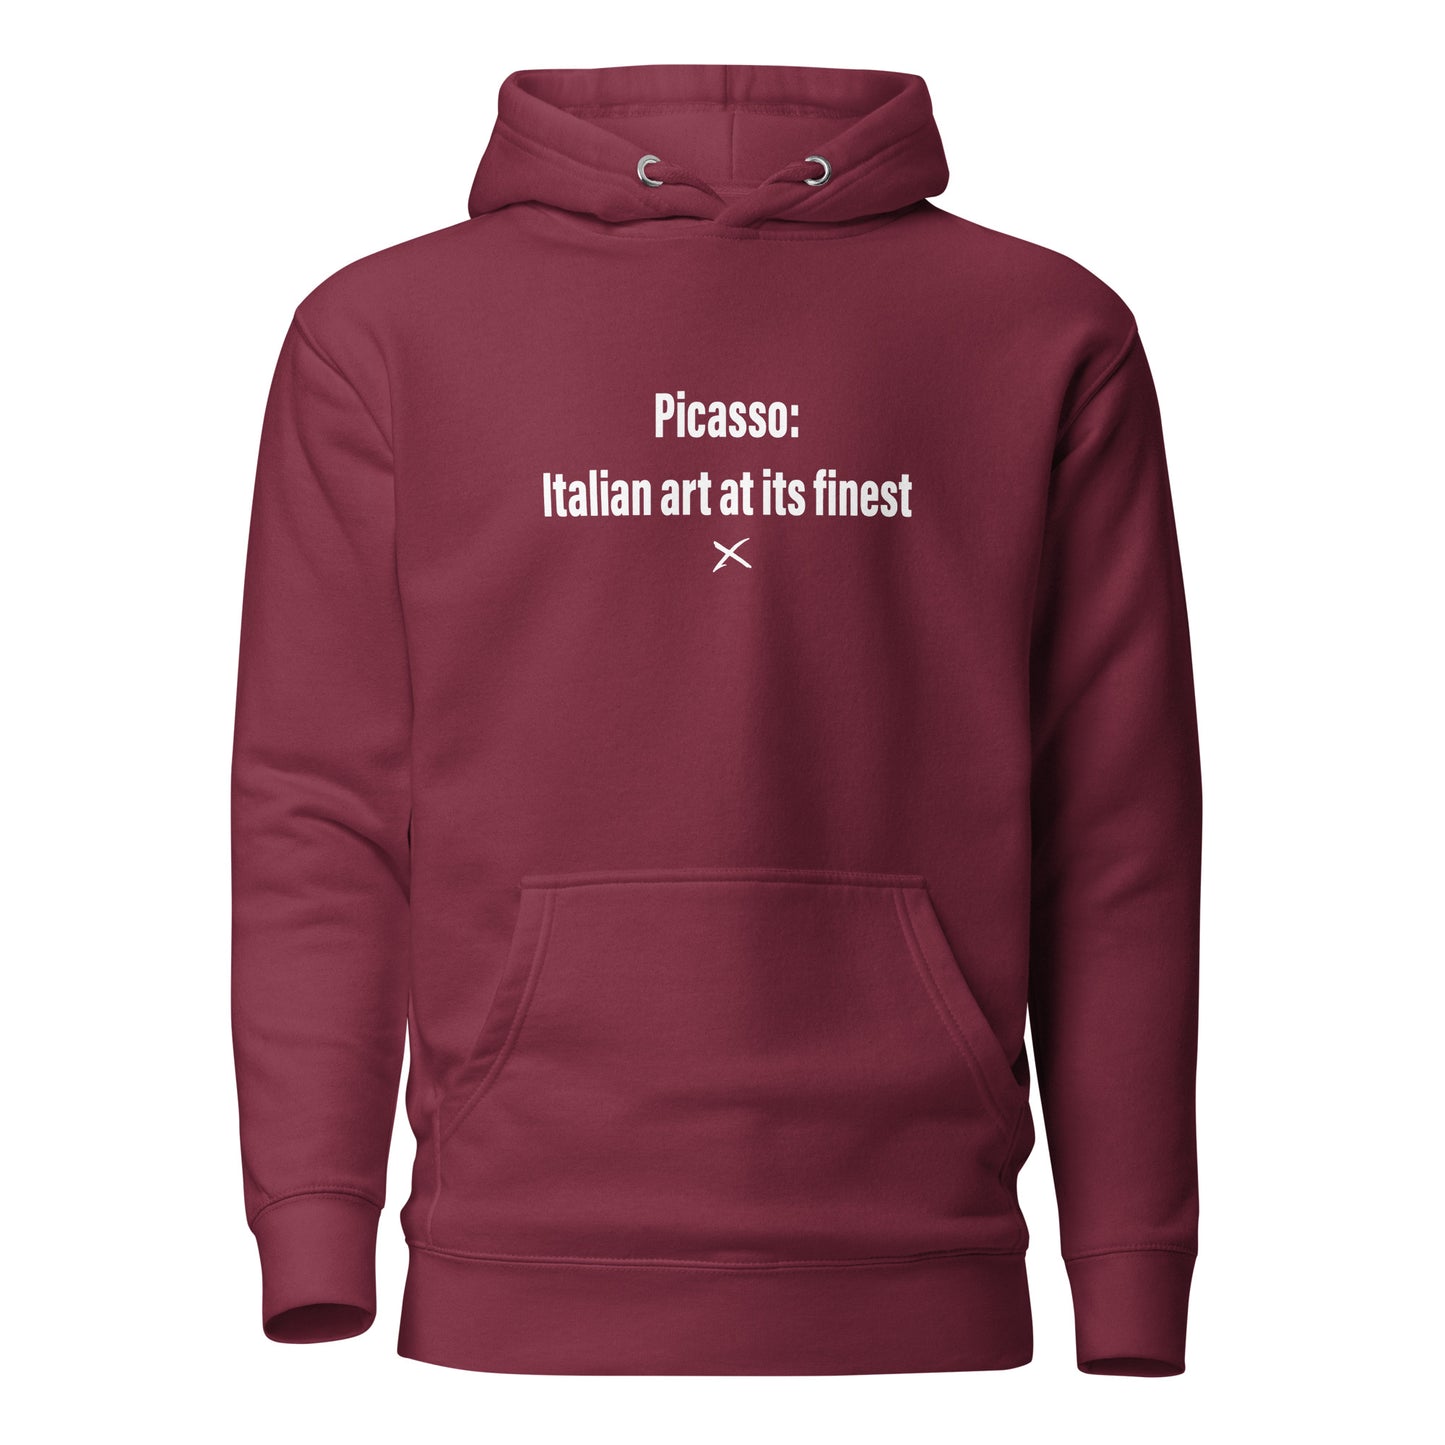 Picasso: Italian art at its finest - Hoodie